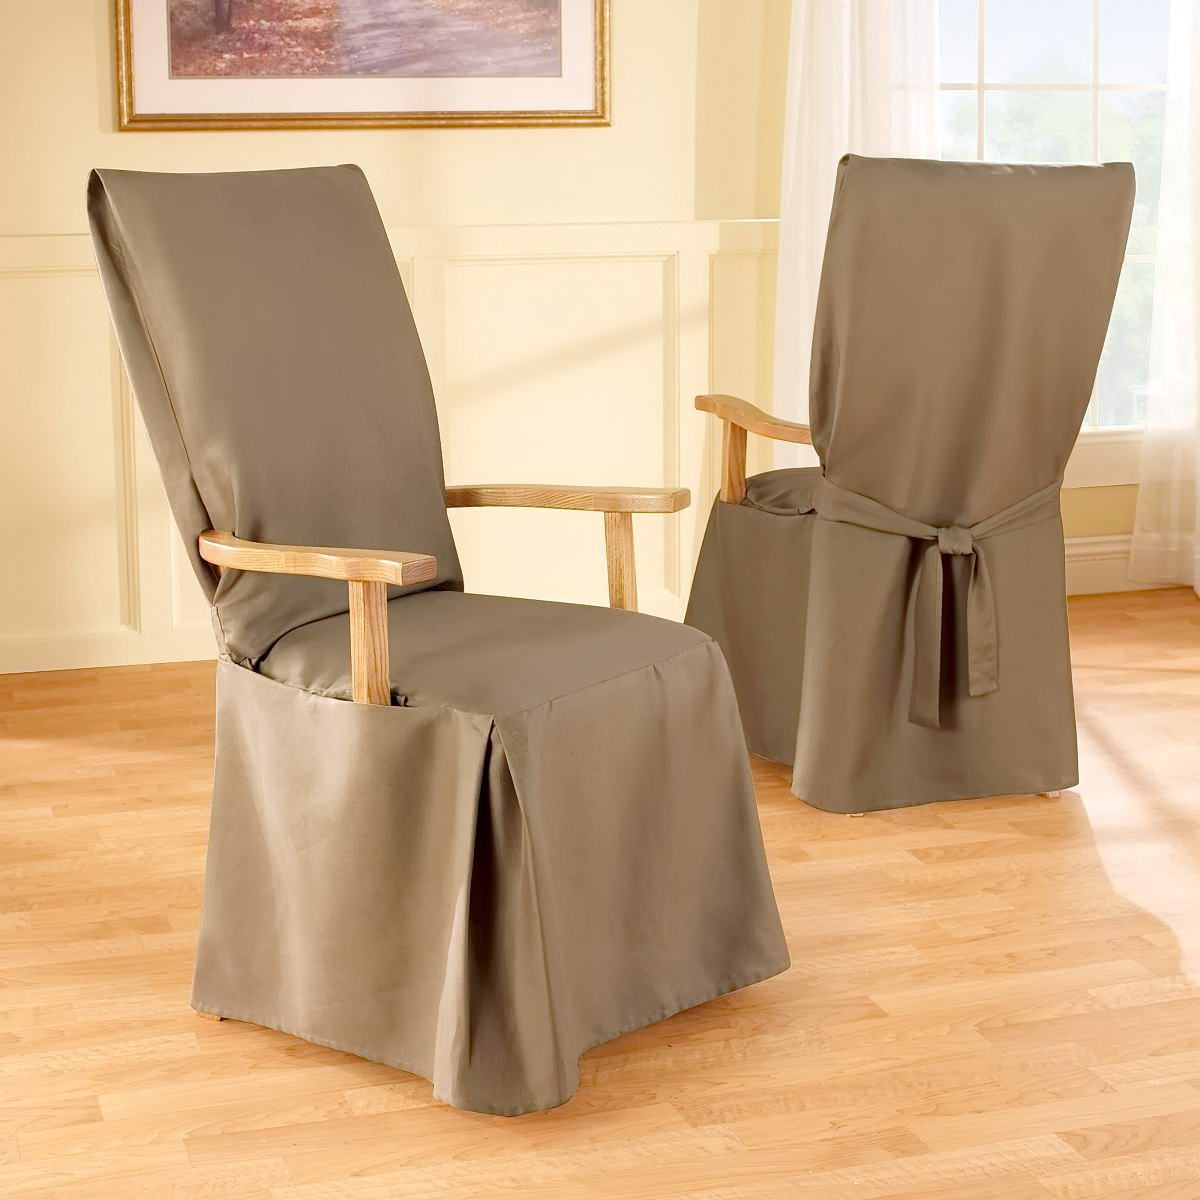 Slipcovers For Dining Room Chairs With Arms Slipcovers For for size 1200 X 1200